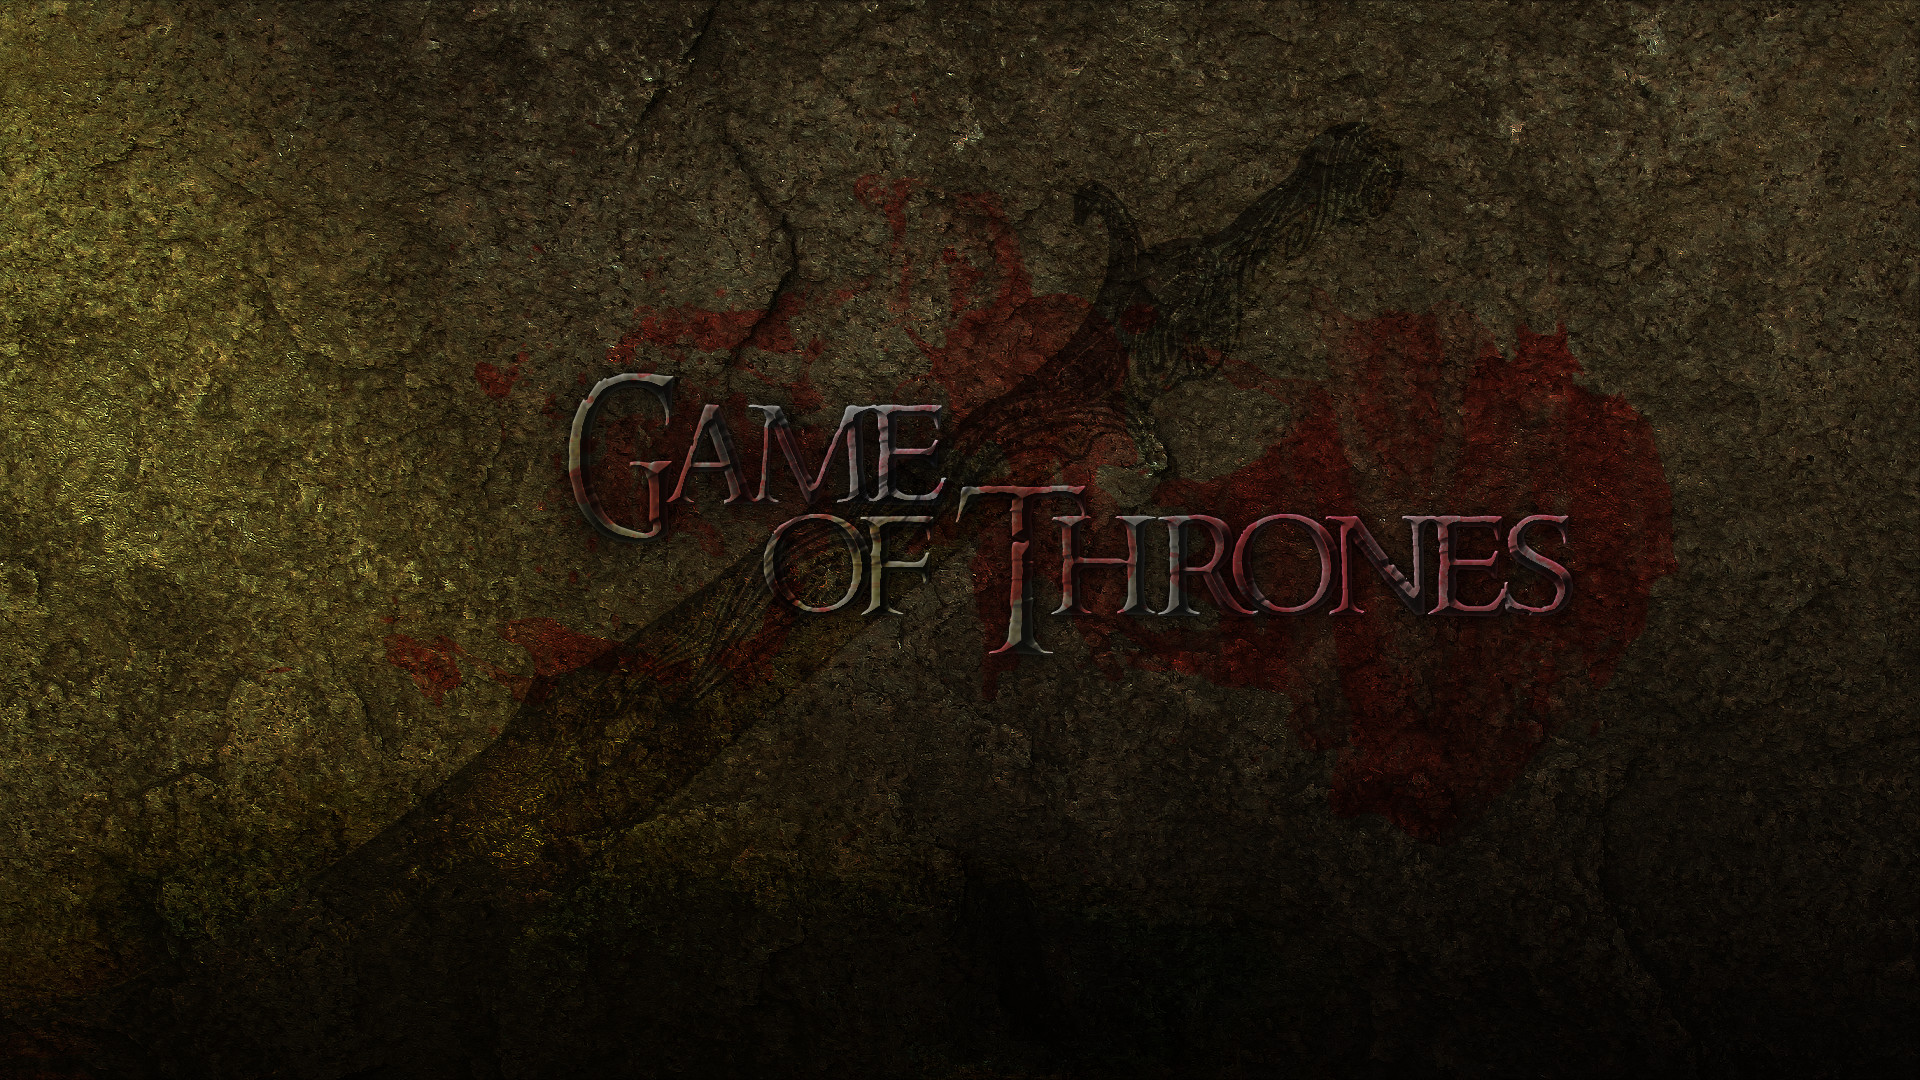 1920x1080 Game of Thrones background HD